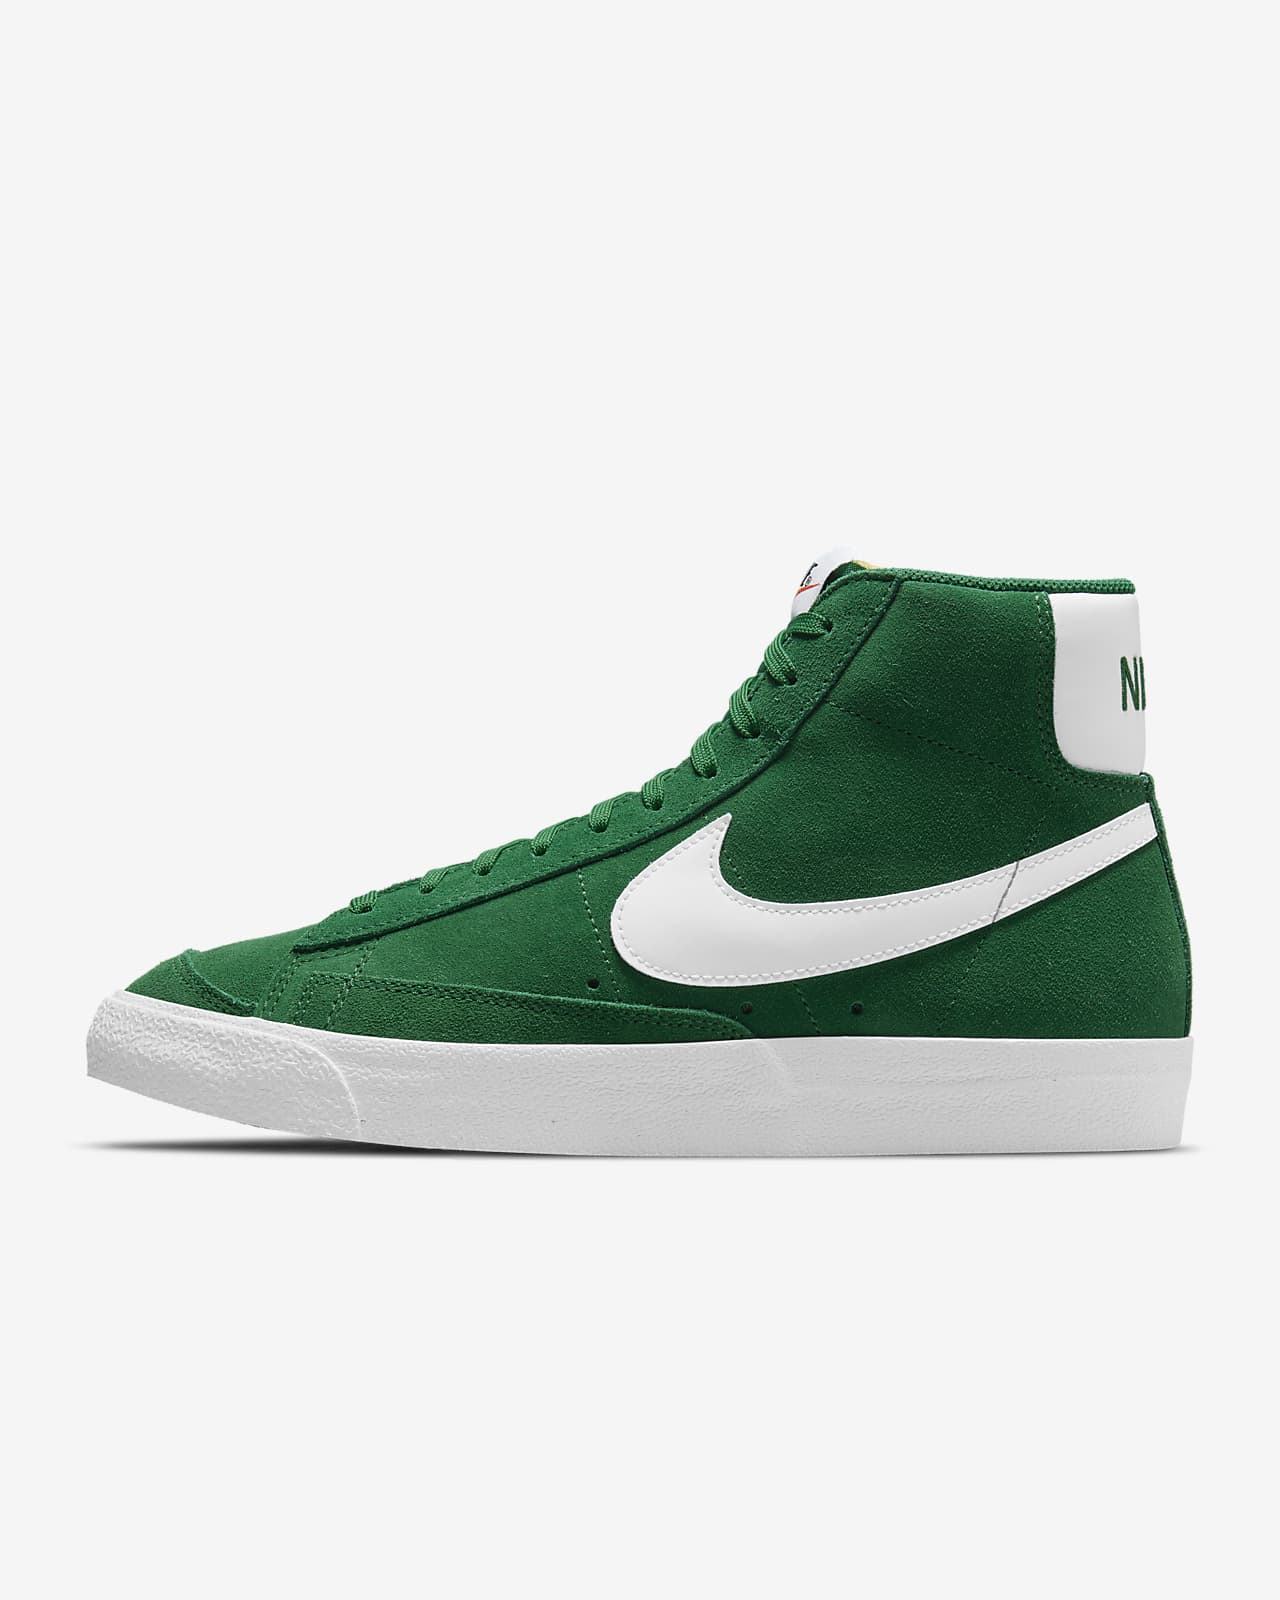 nike shoes green and white